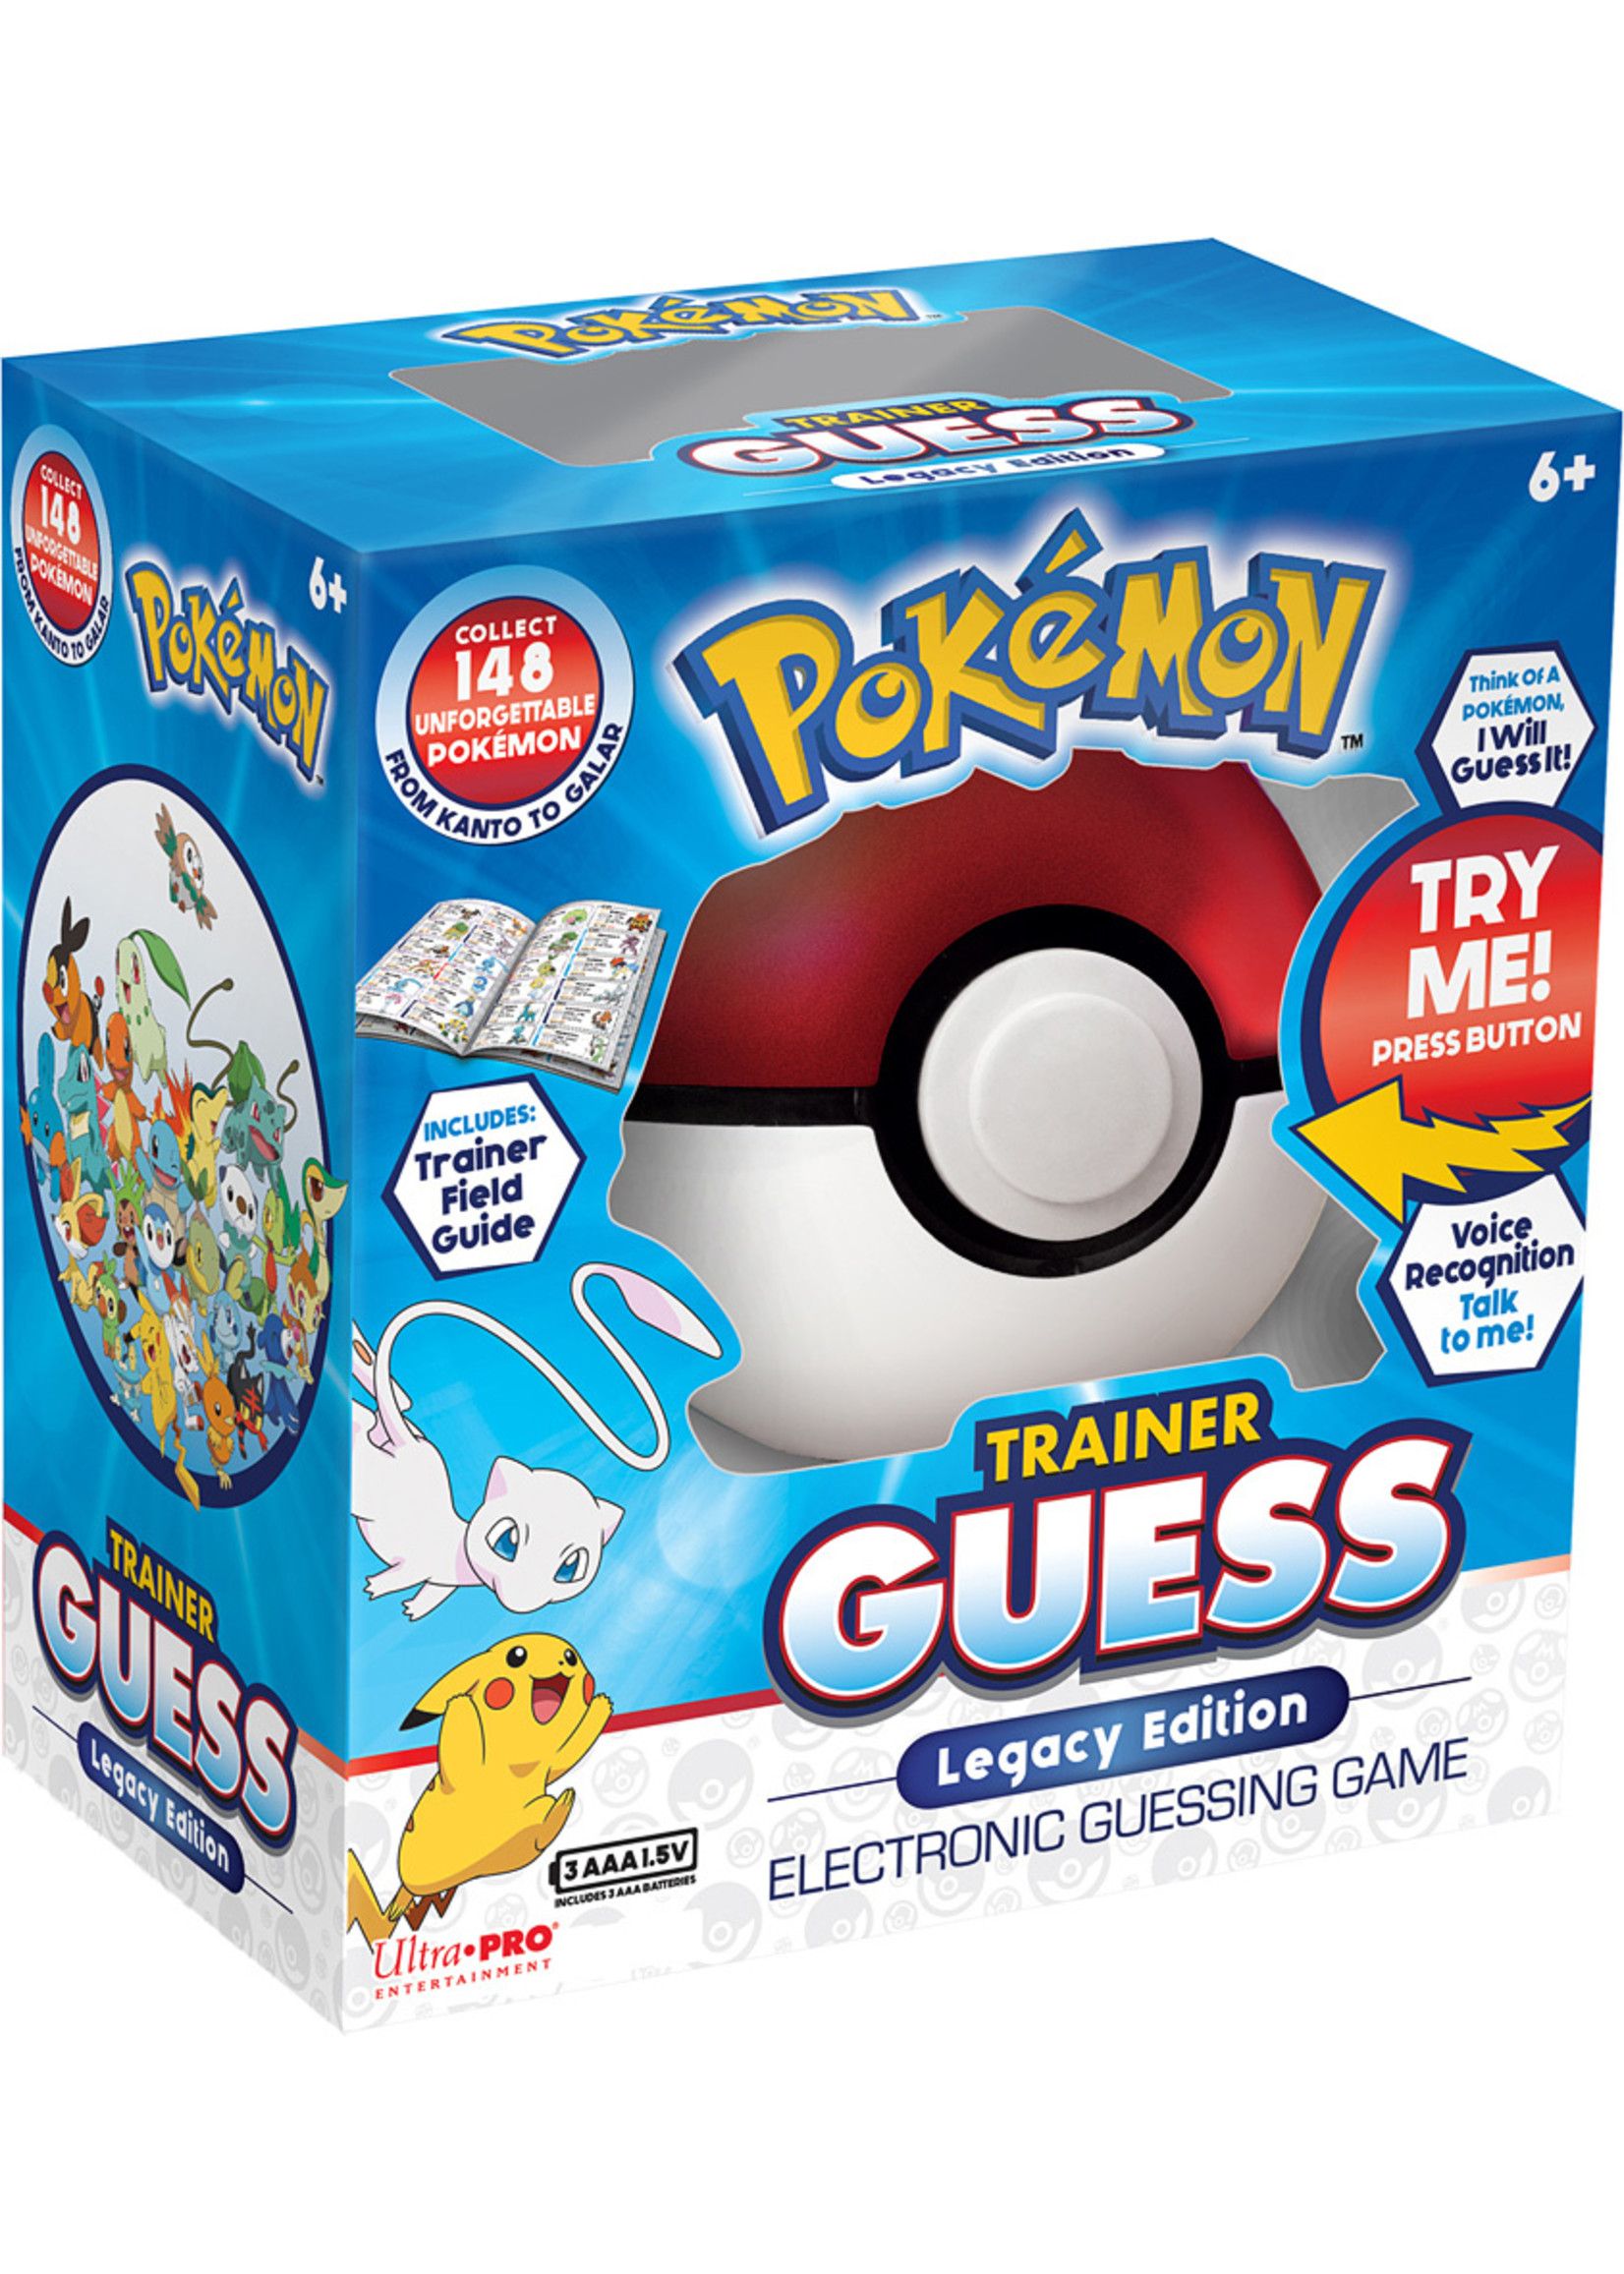 Ultra Pro Pokemon Trainer Guess - Legacy Edition - Electronic Guessing Game